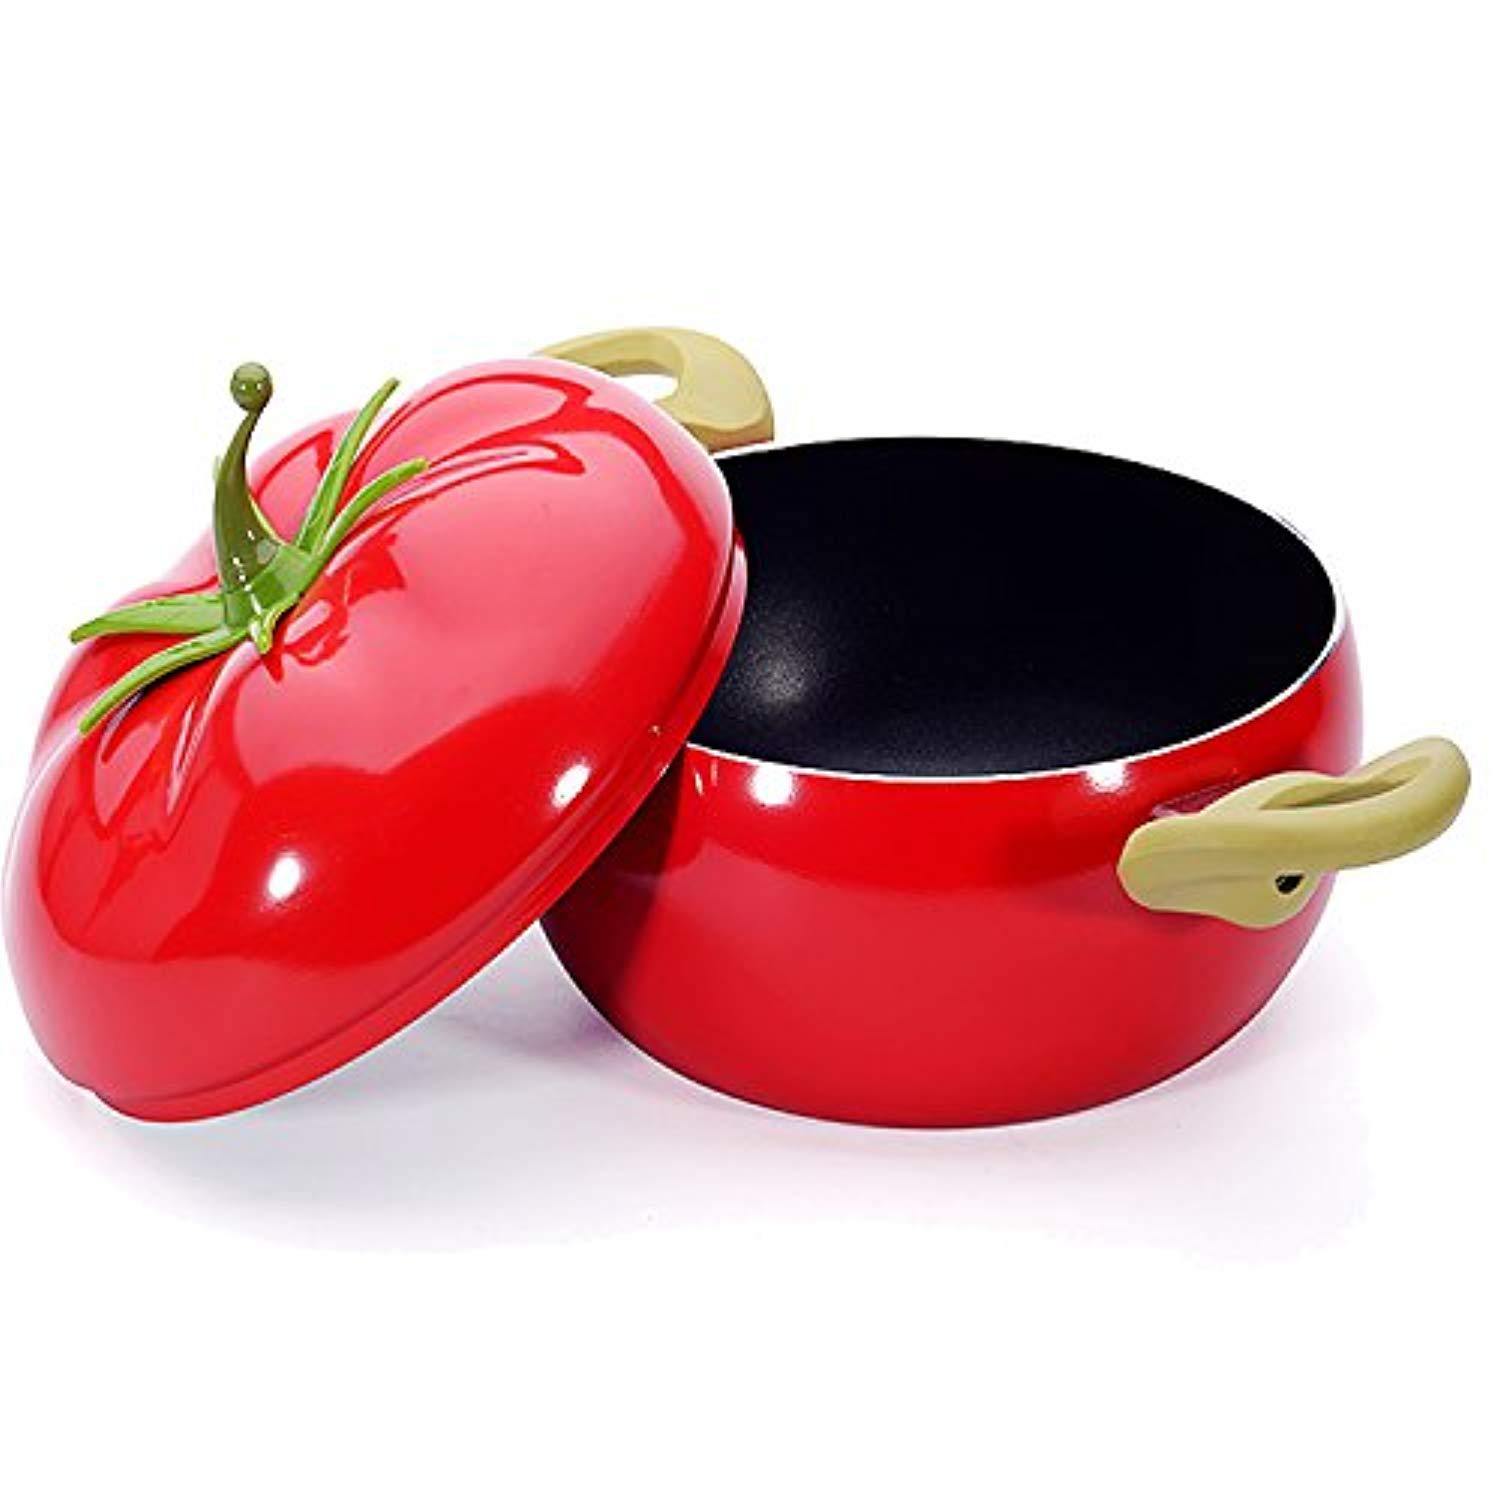 Bosonshop 3 Quart Pot Tomato Shape Sauce Pan With Cover Stainless Steel Aluminium, Red